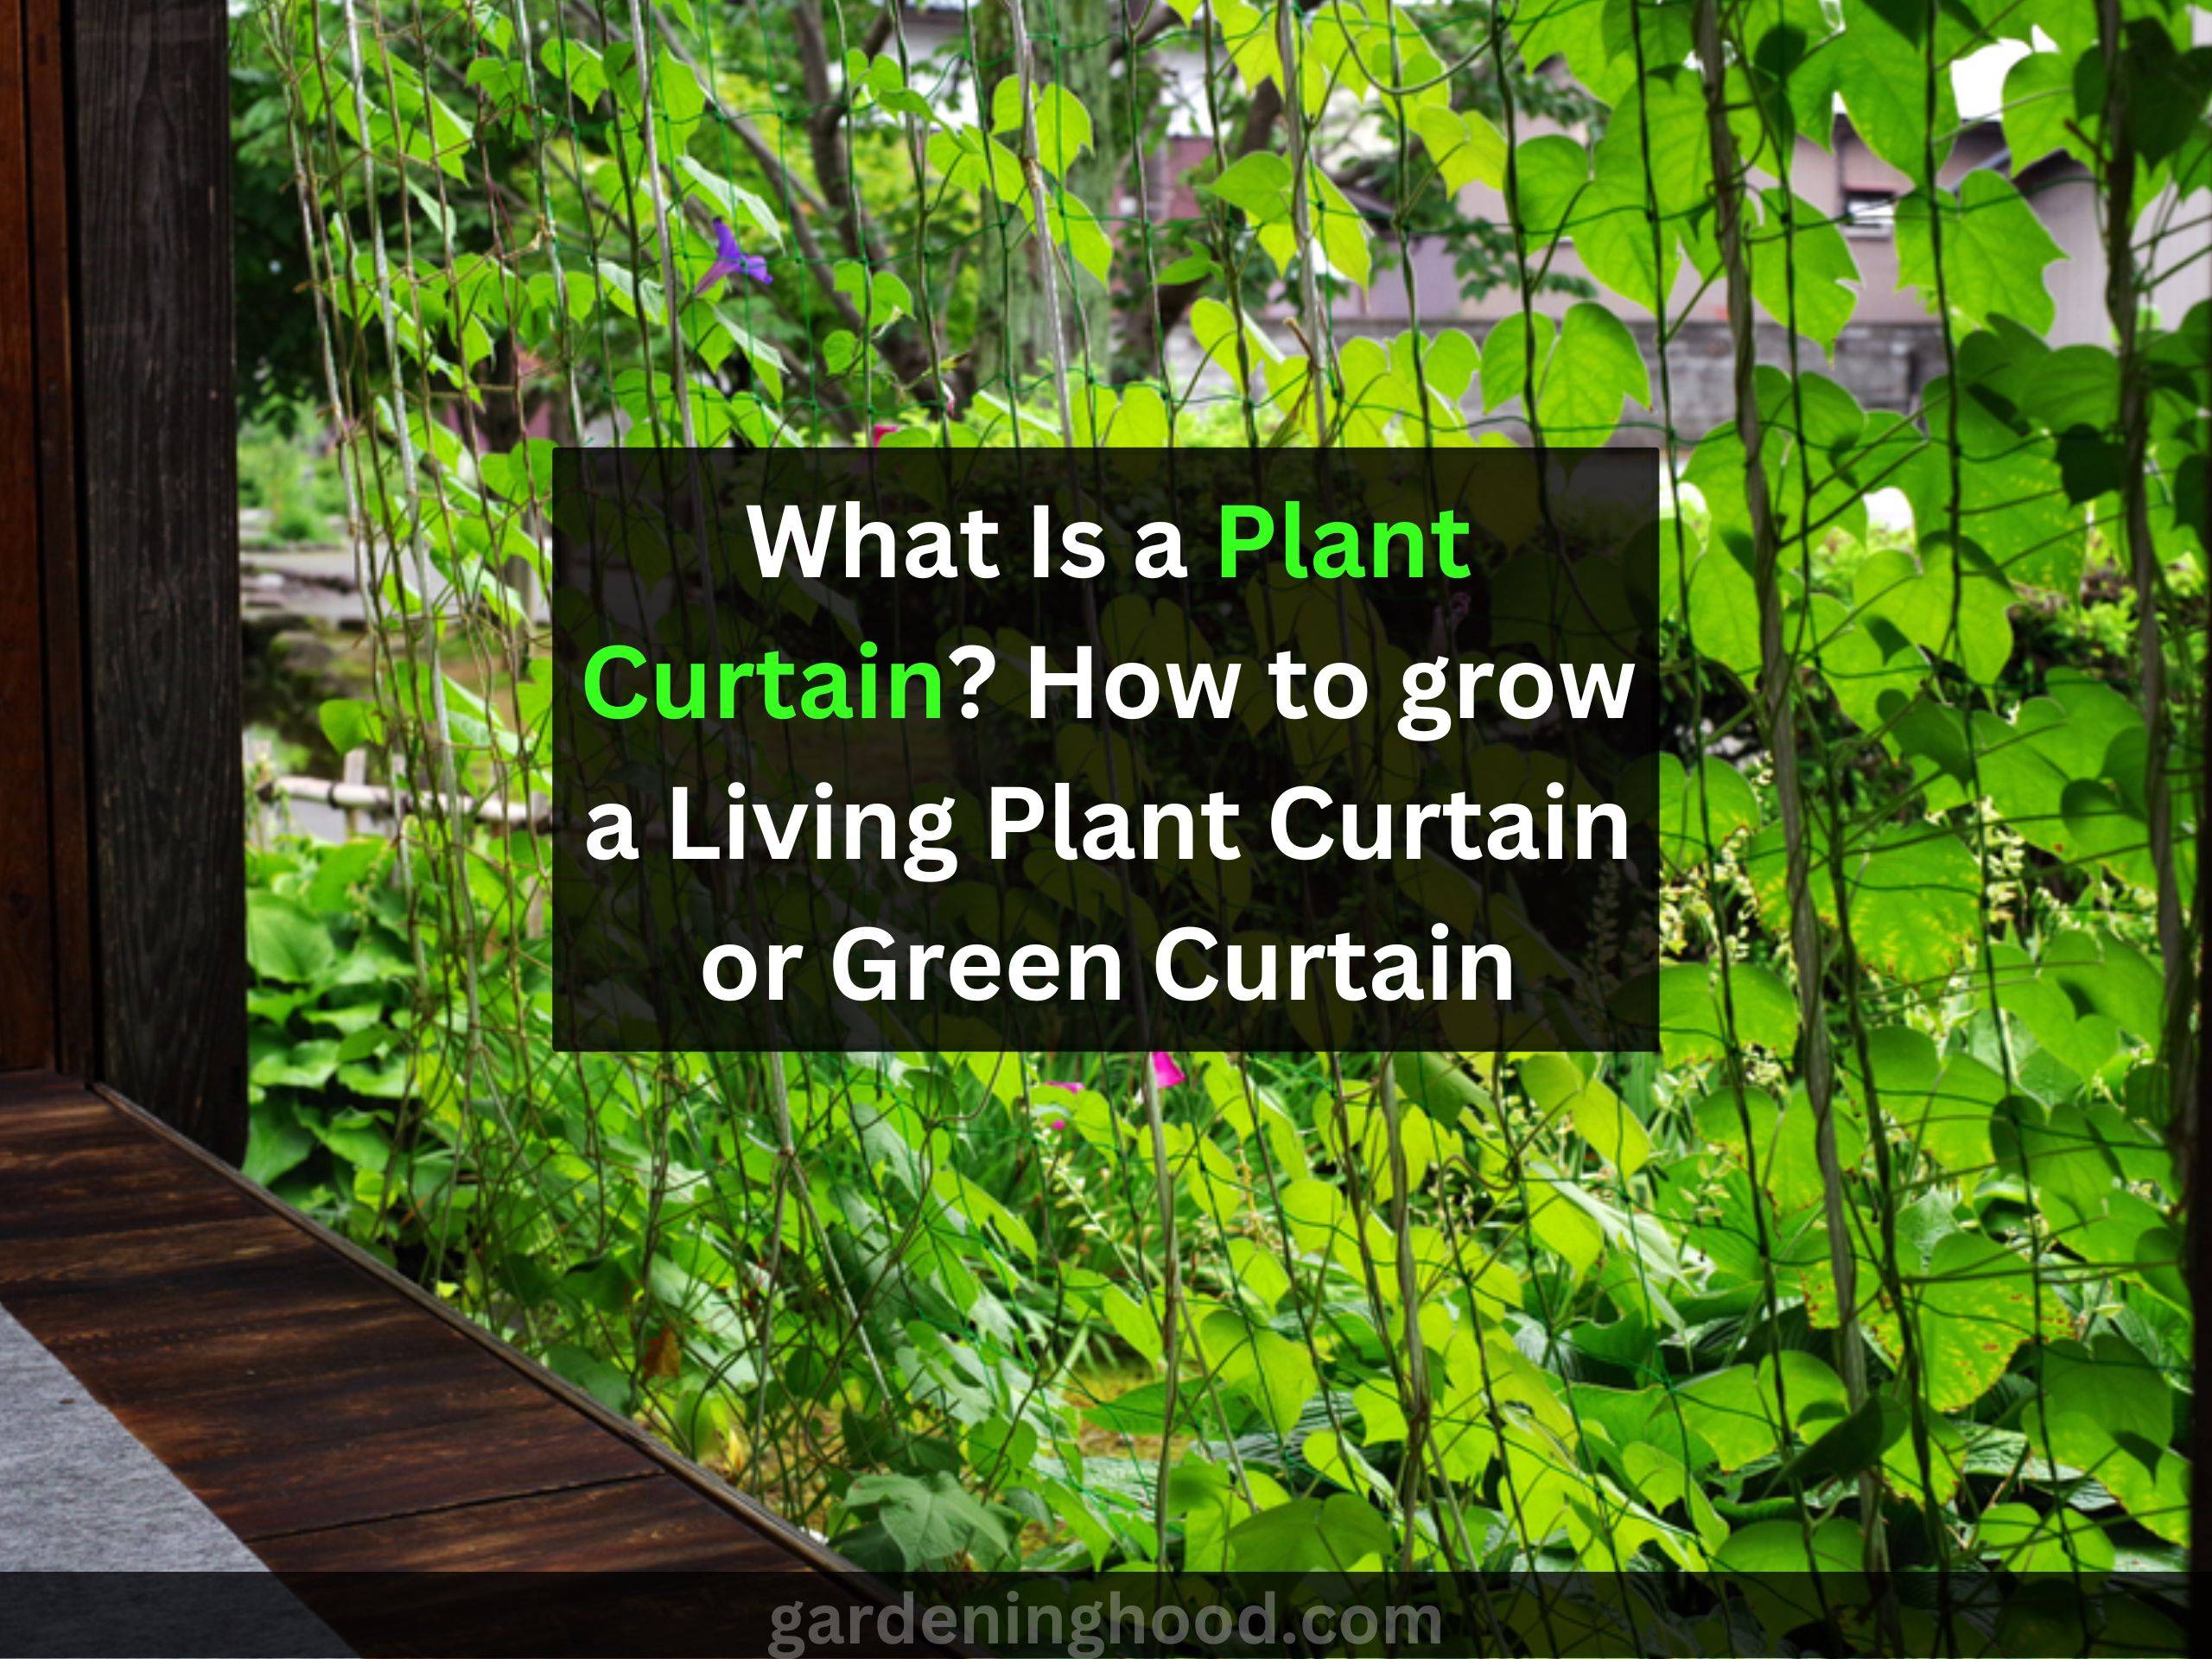 What Is a Plant Curtain? How to grow a Living Plant Curtain or Green Curtain